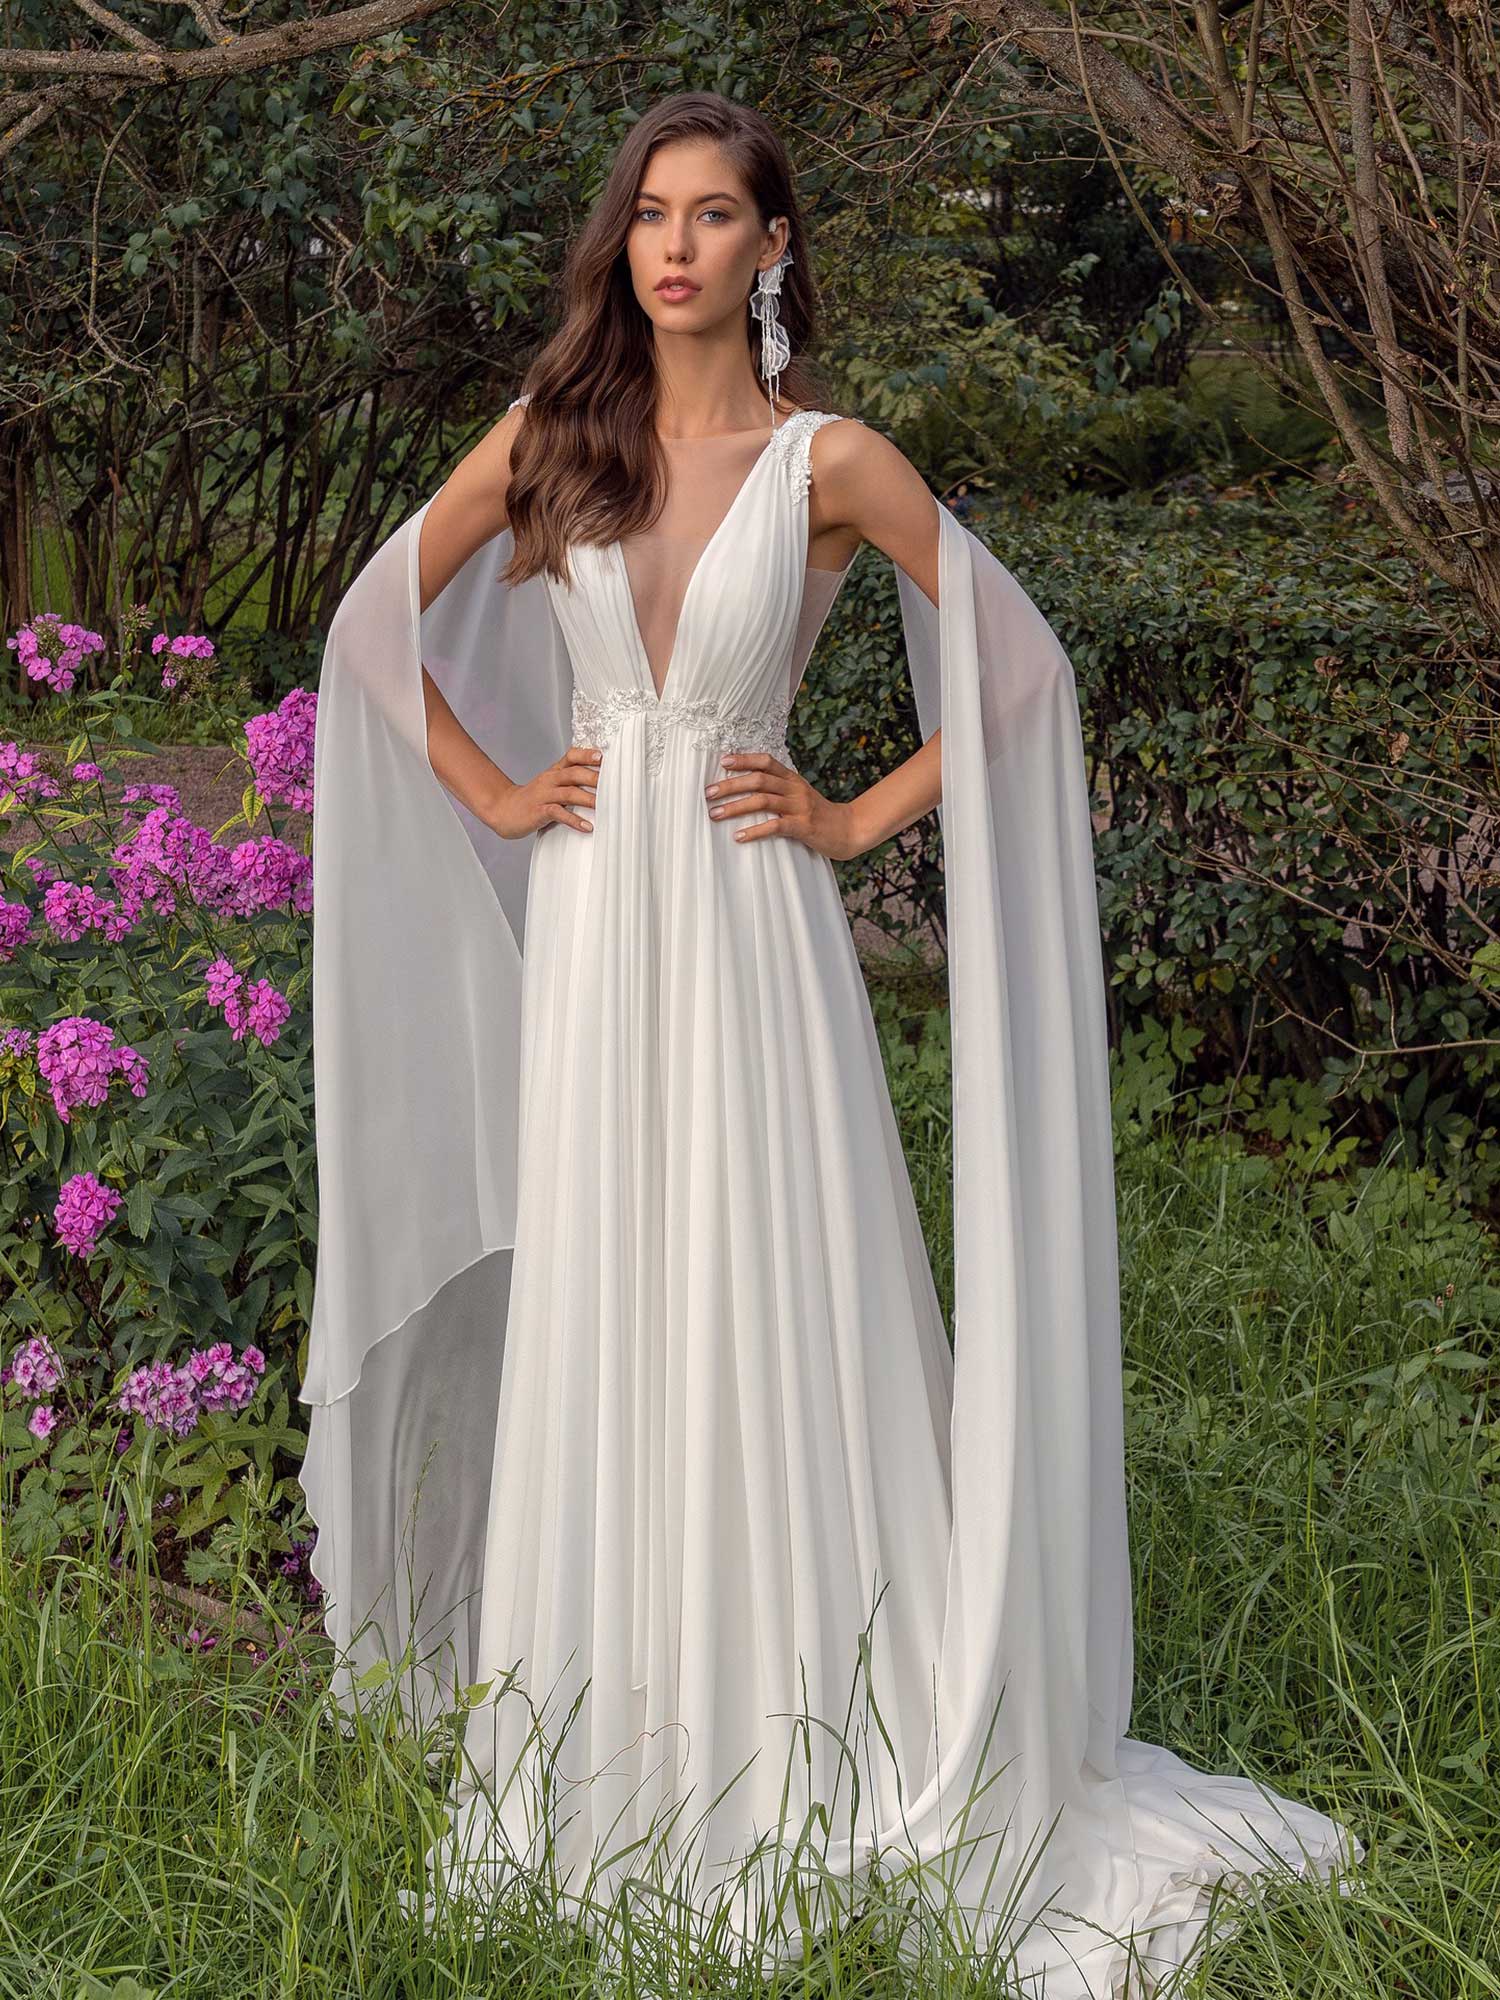 Glam Up Your Big Day with a Wedding Dress With Cape